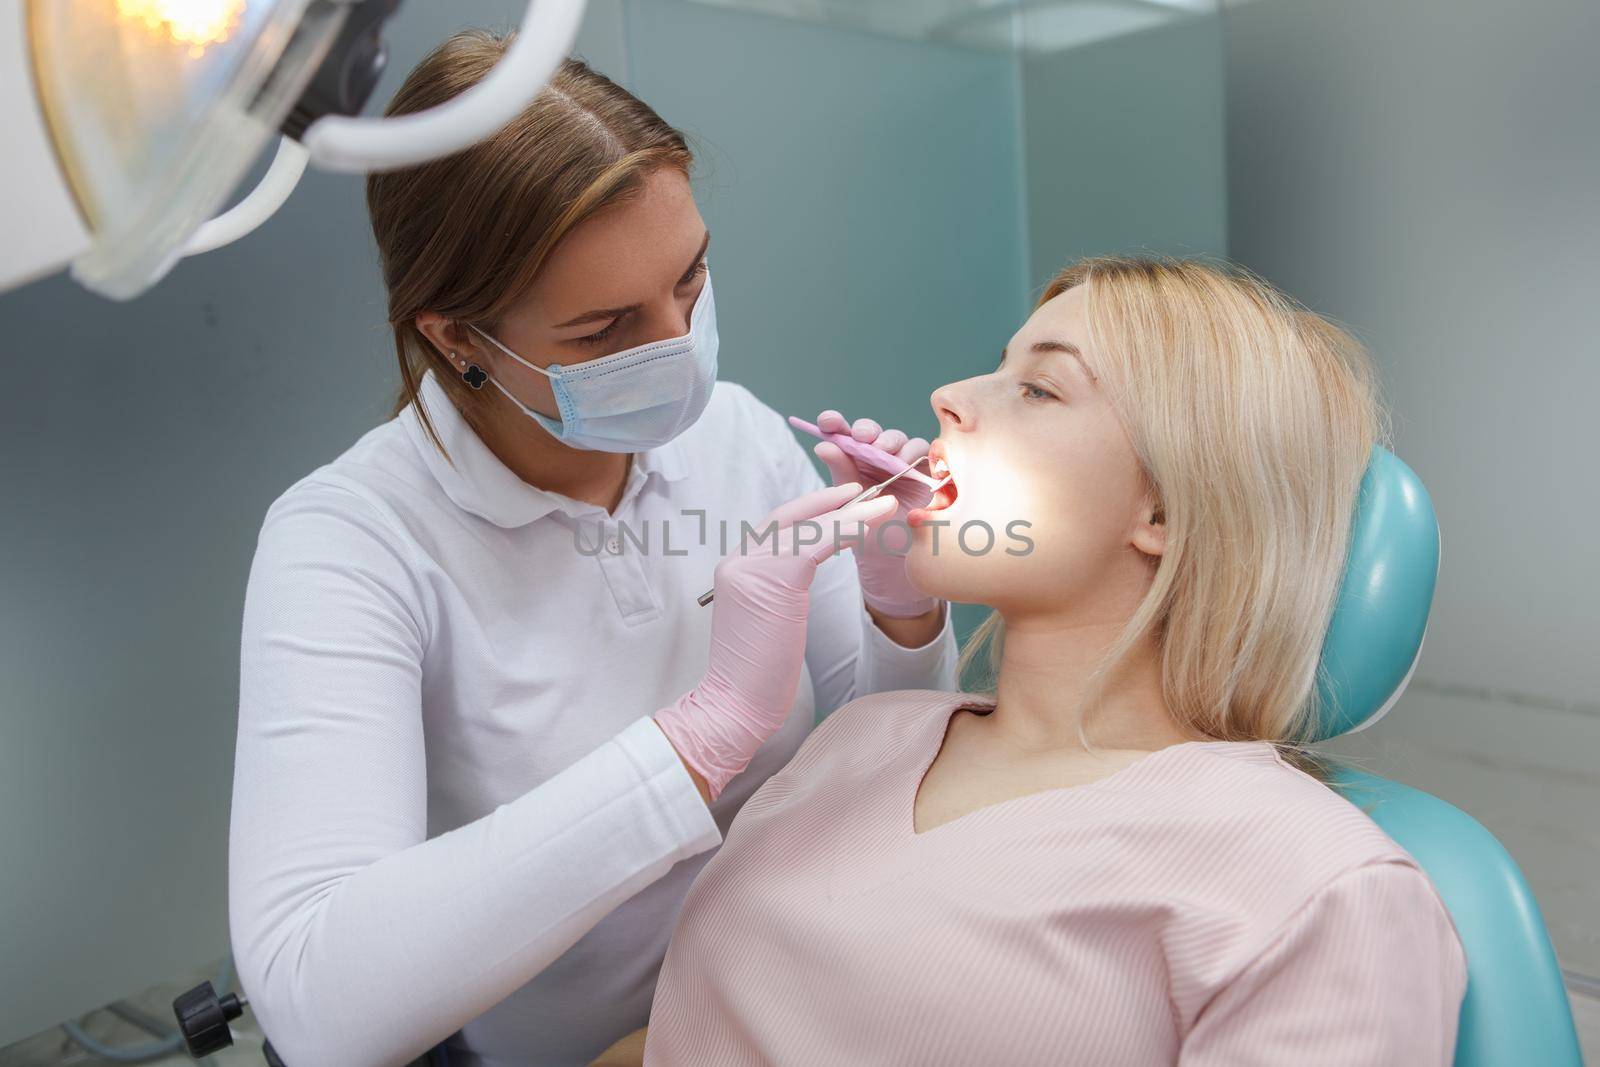 Professional dentist wearing medical face mask, examining teeth of female patient